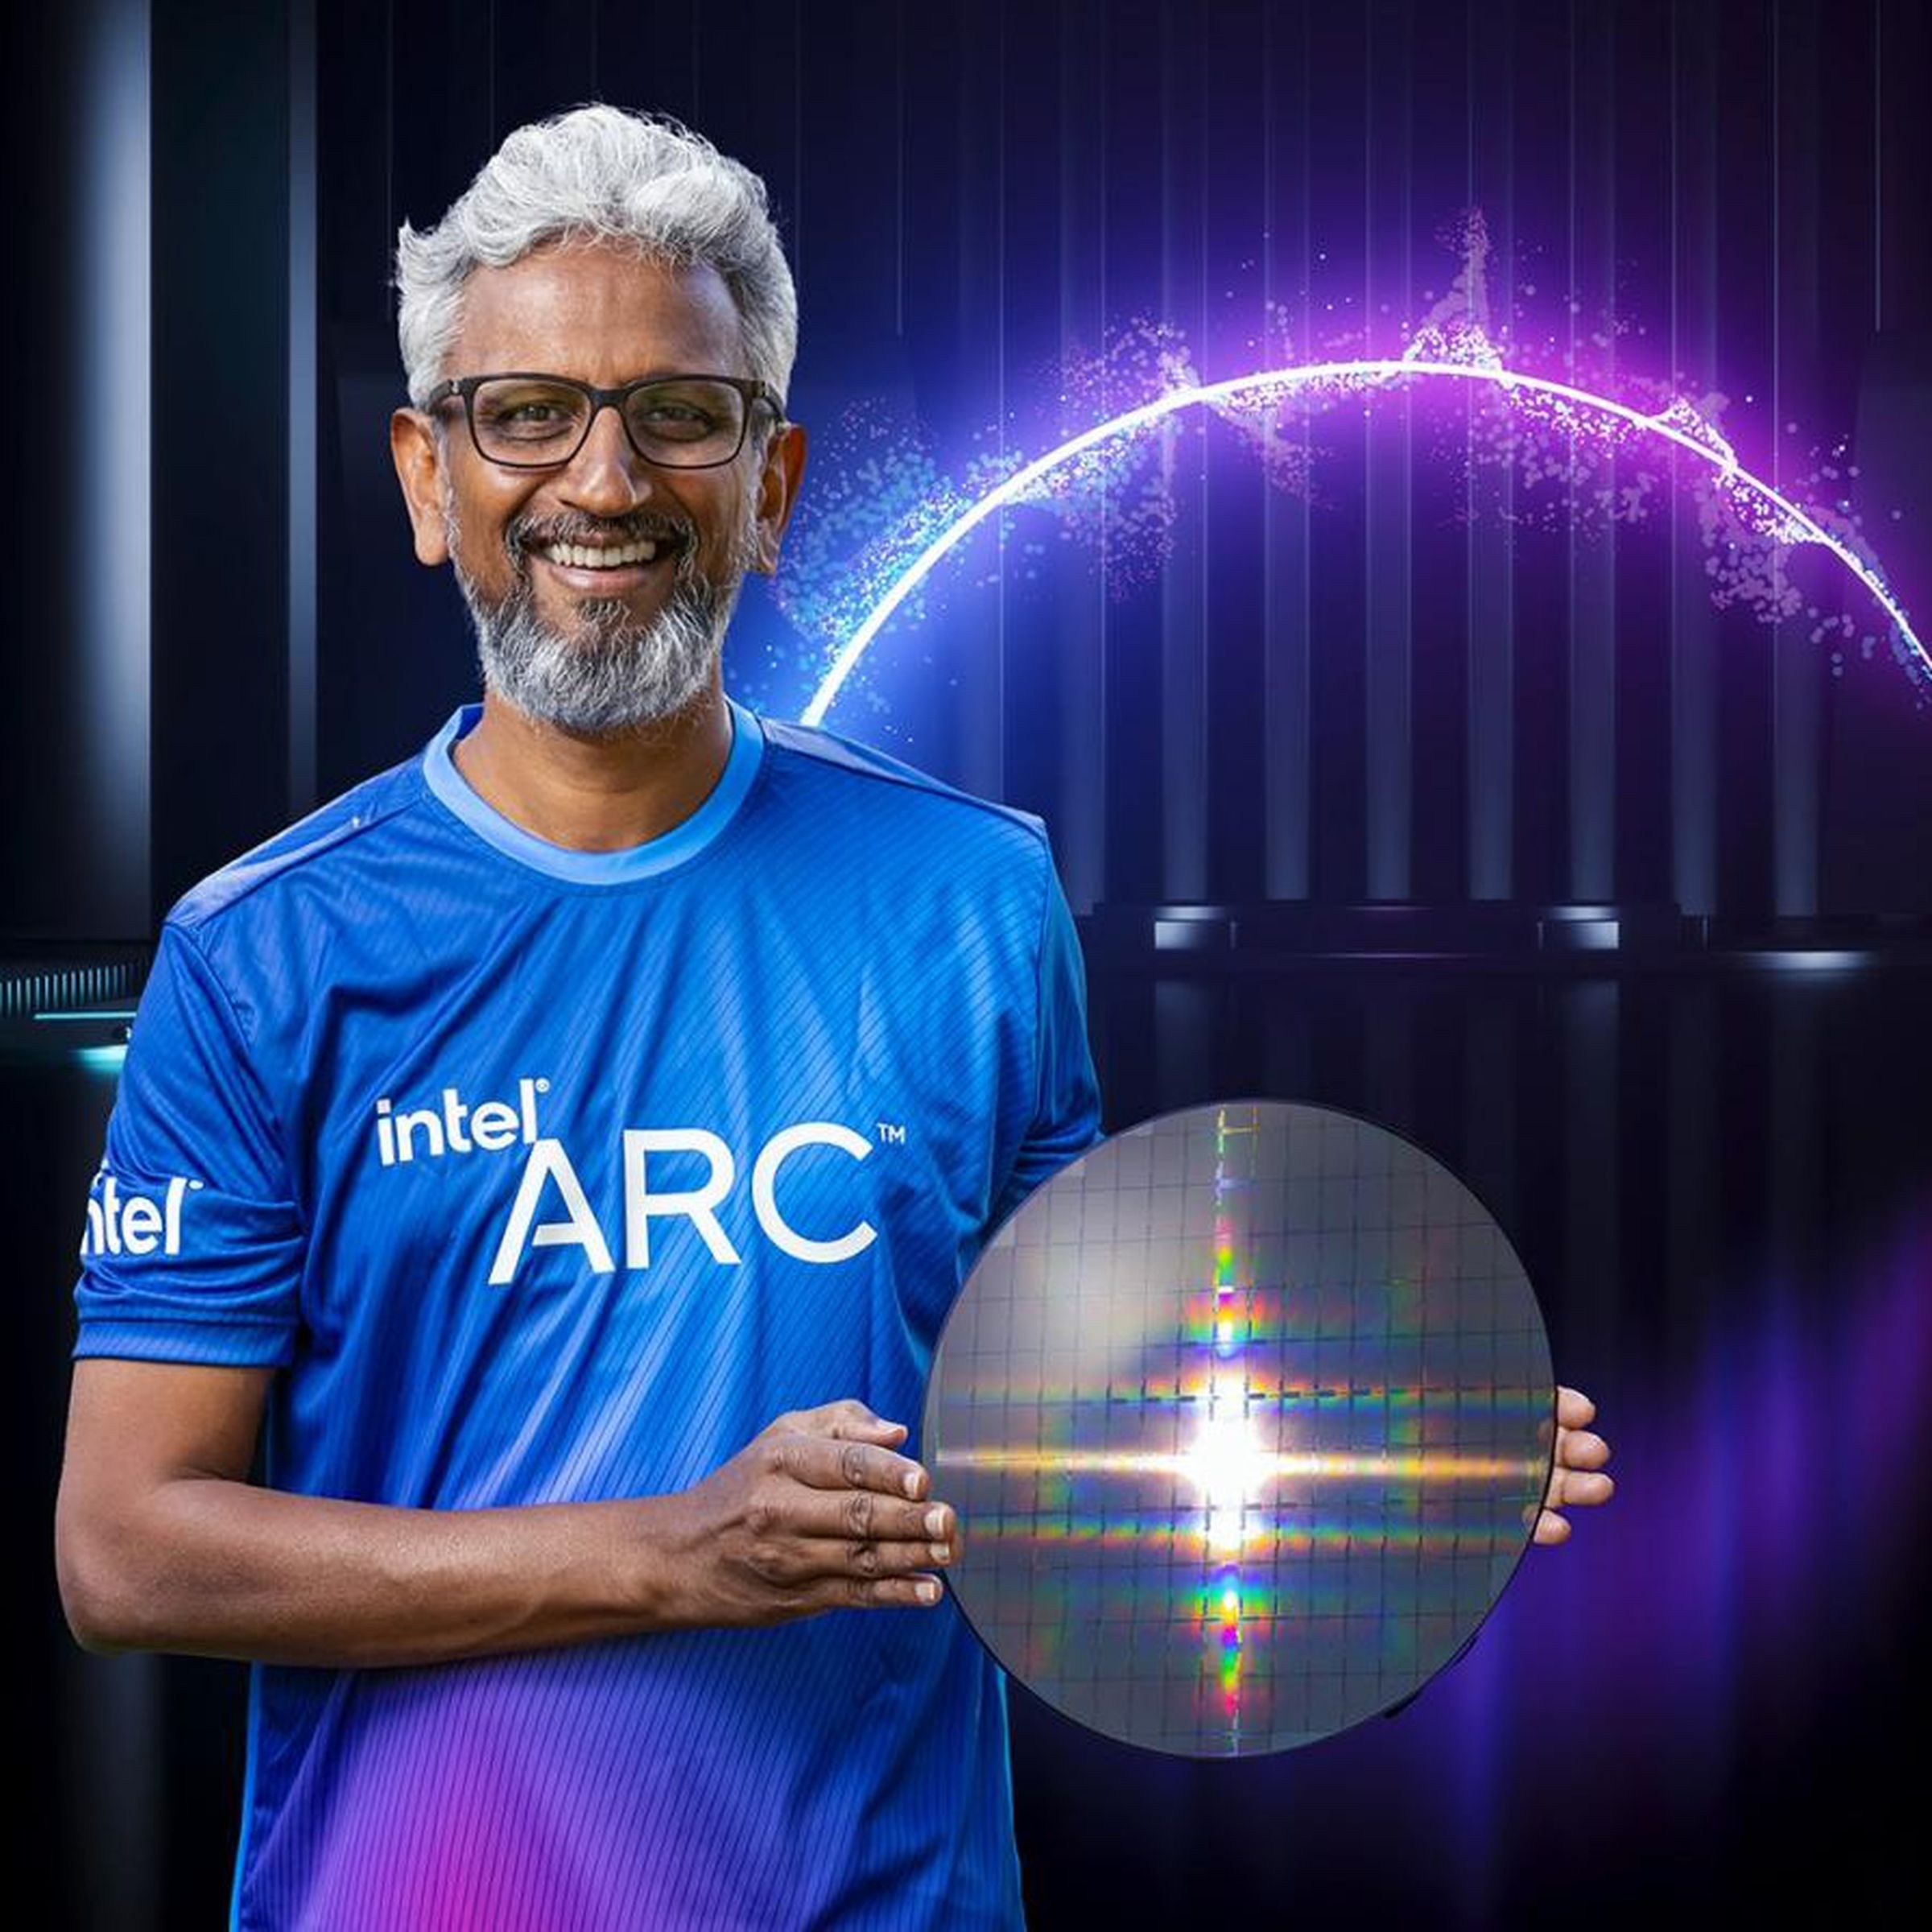 Raja Koduri, wearing a jersey celebrating the Intel Arc GPUs and holding a silicon wafer.